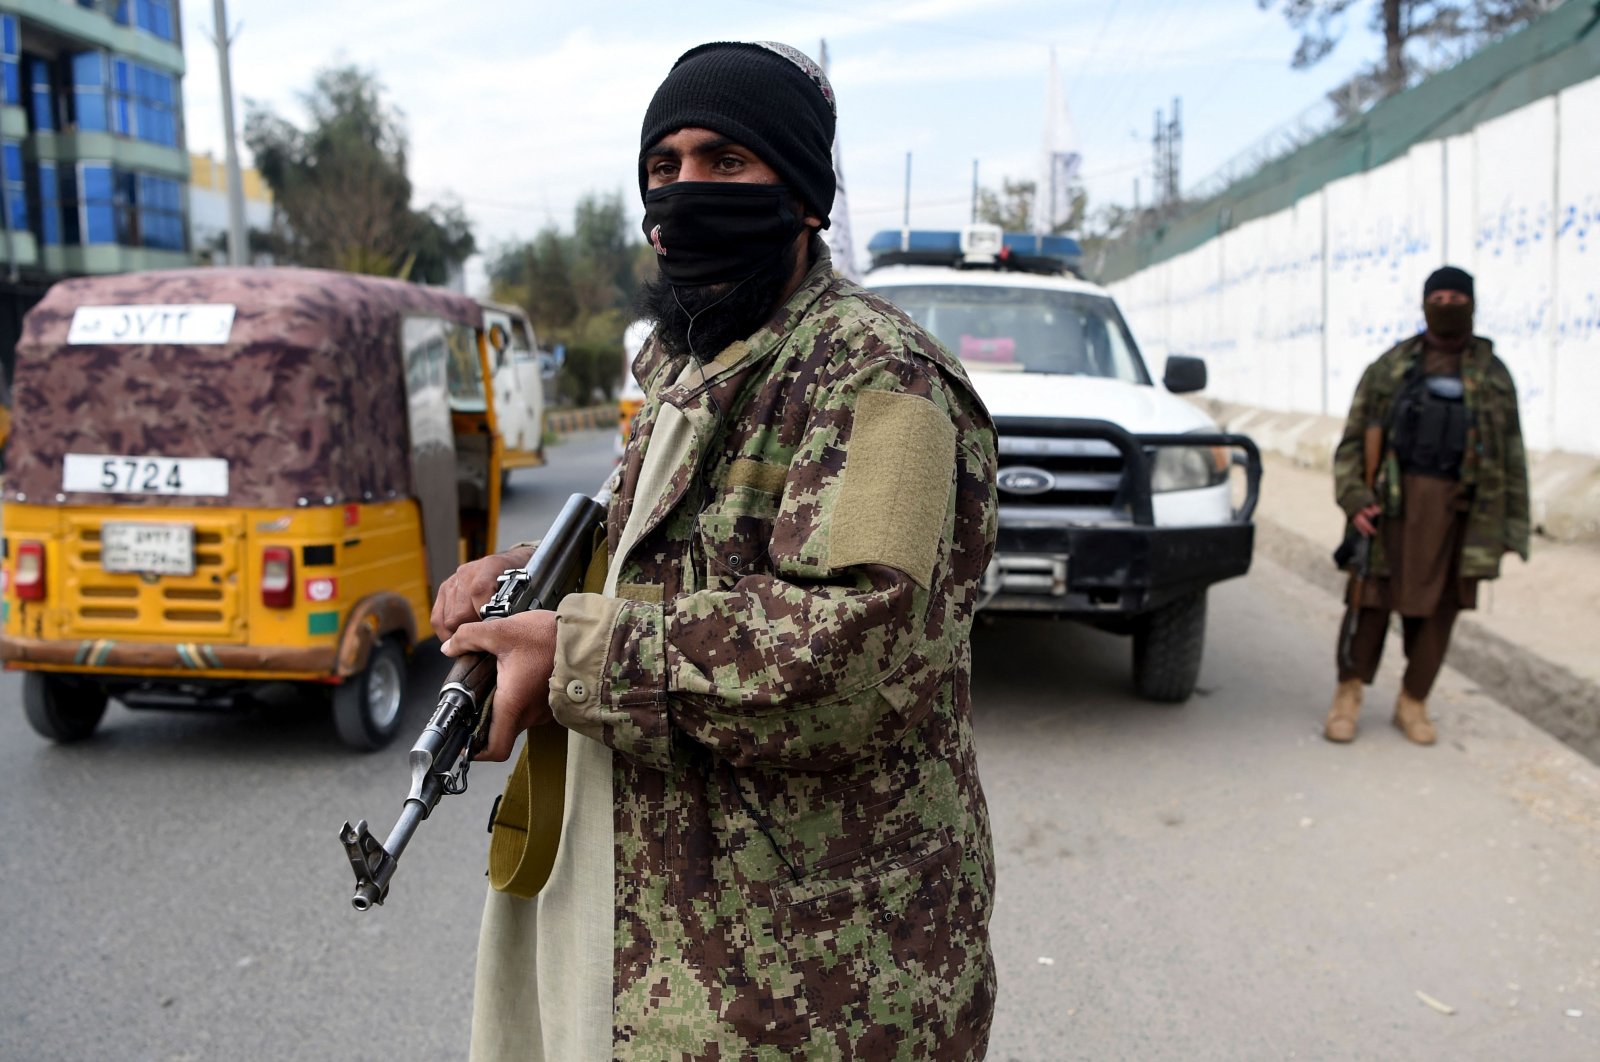 Taliban fighters stand guard along a roadside in Jalalabad, Dec. 12, 2021. (AFP Photo)